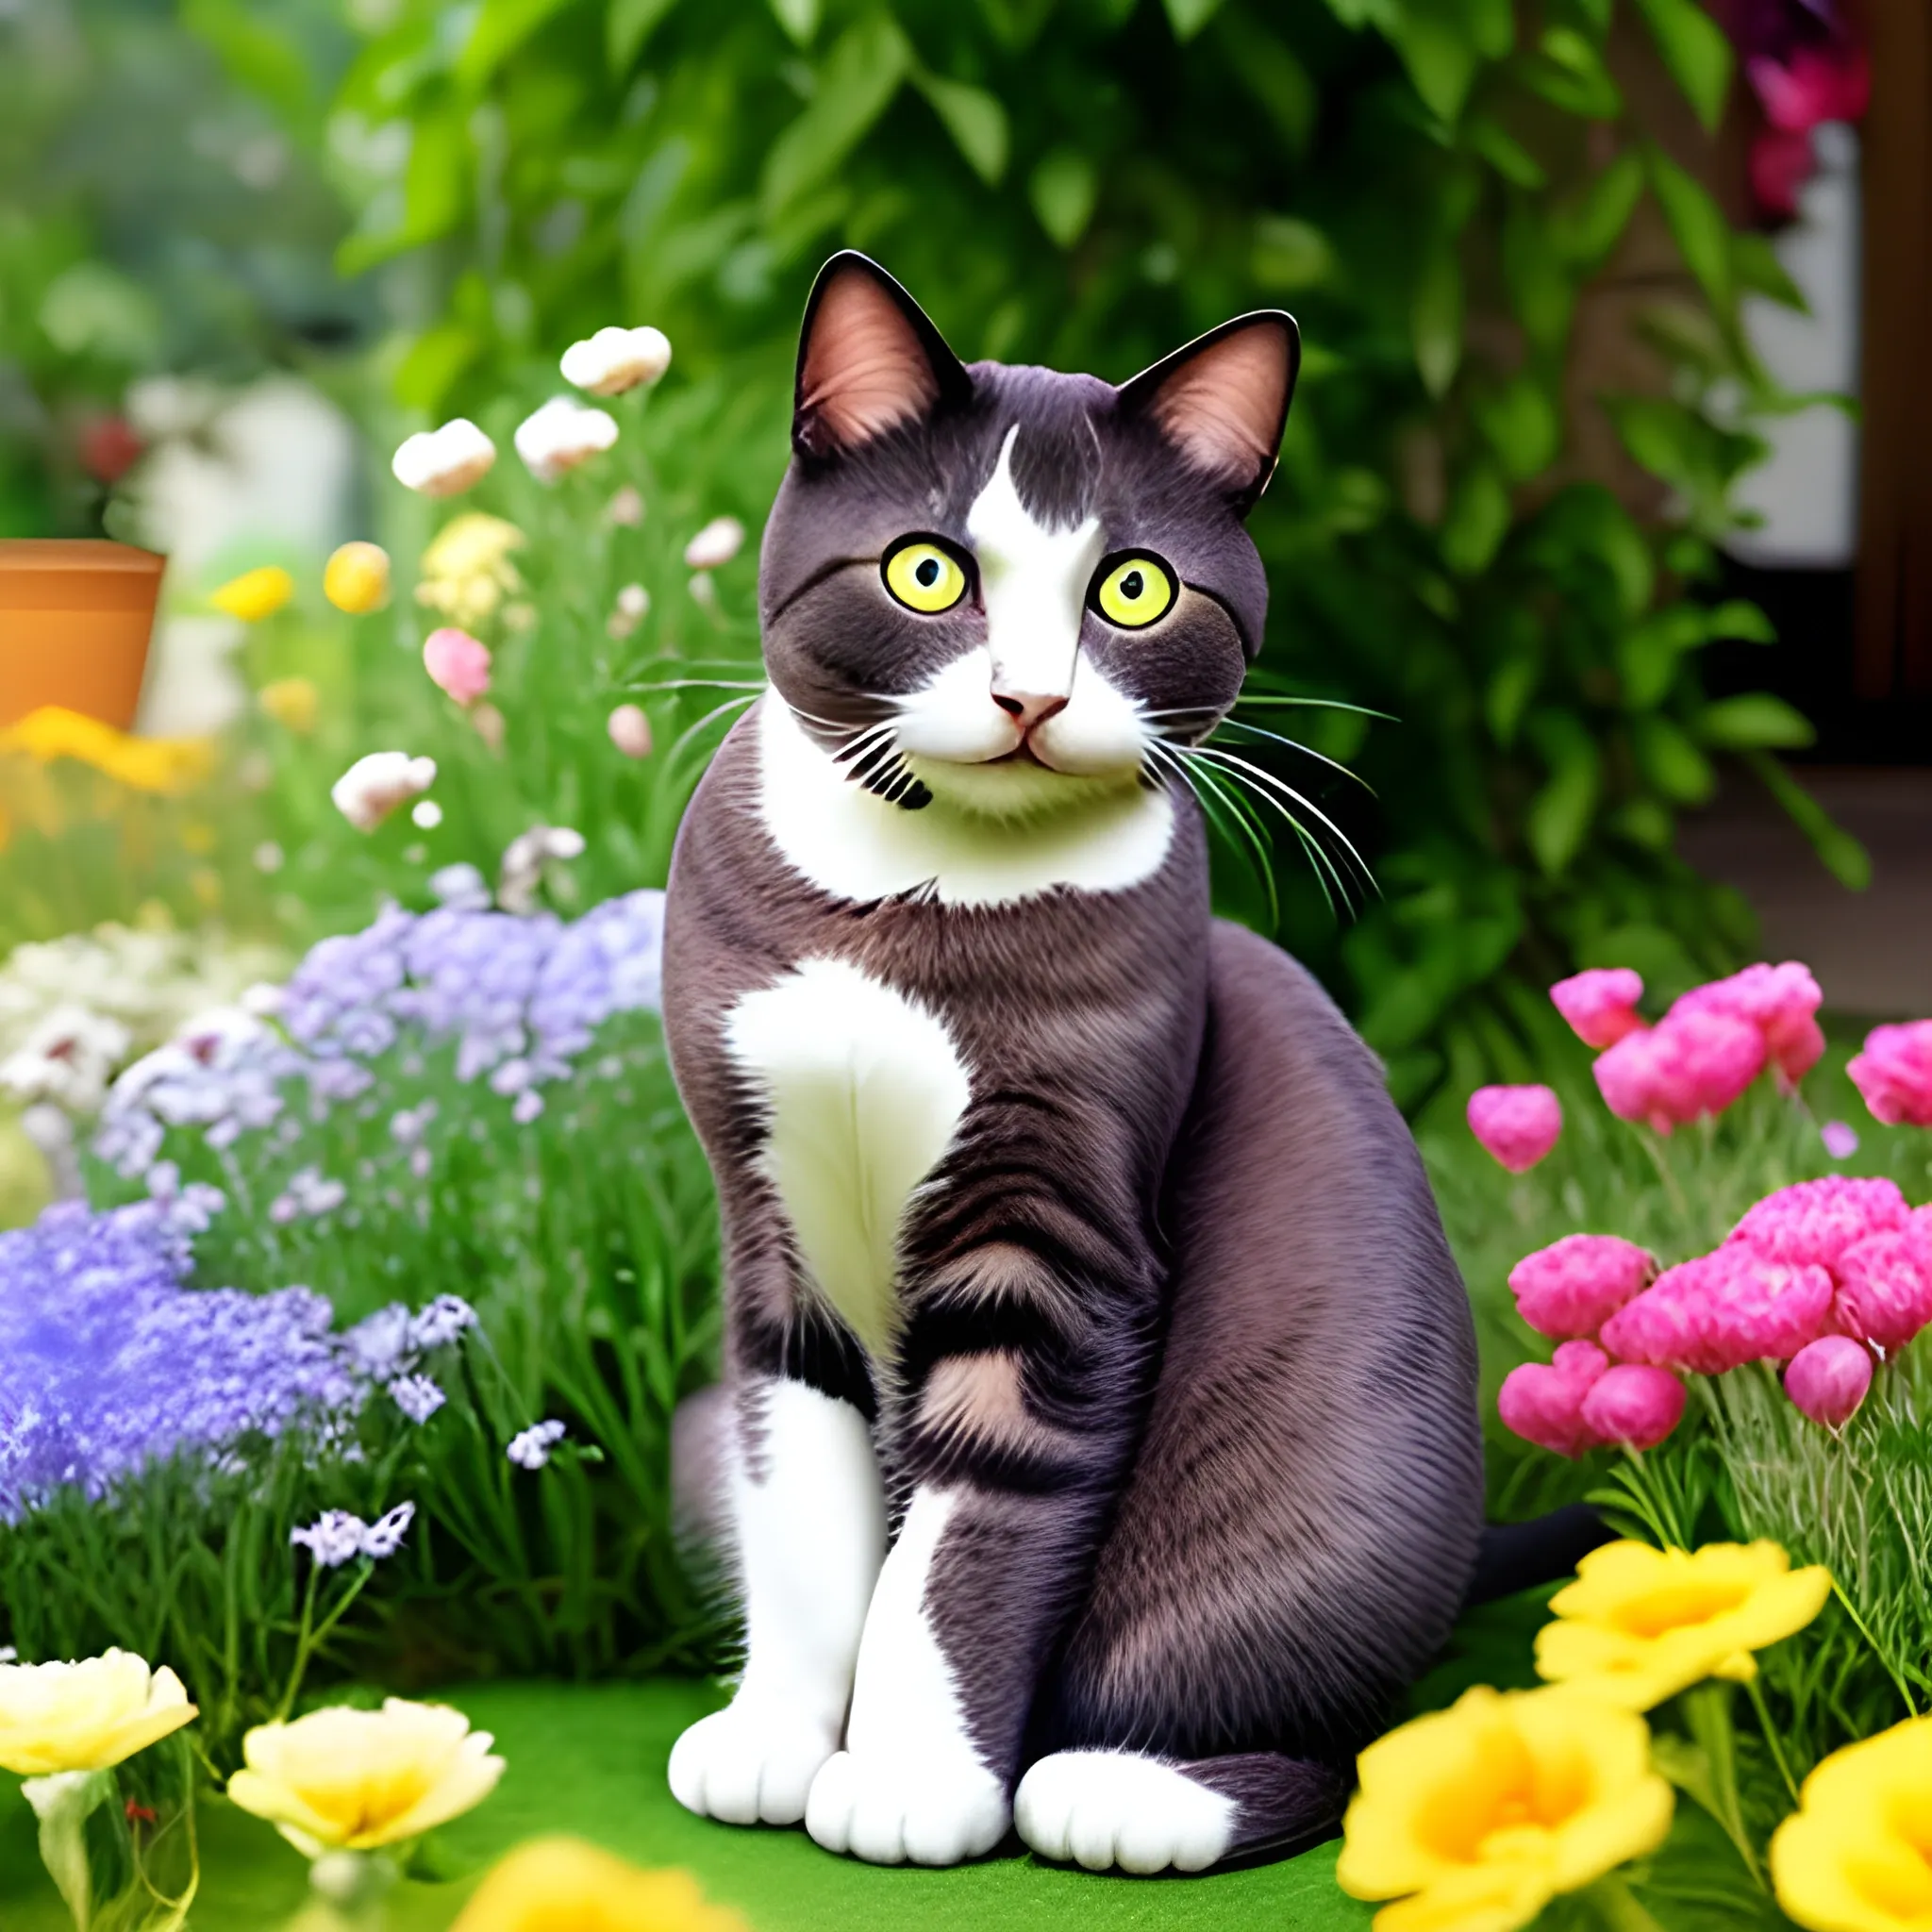 A cat is sitting on a large flower